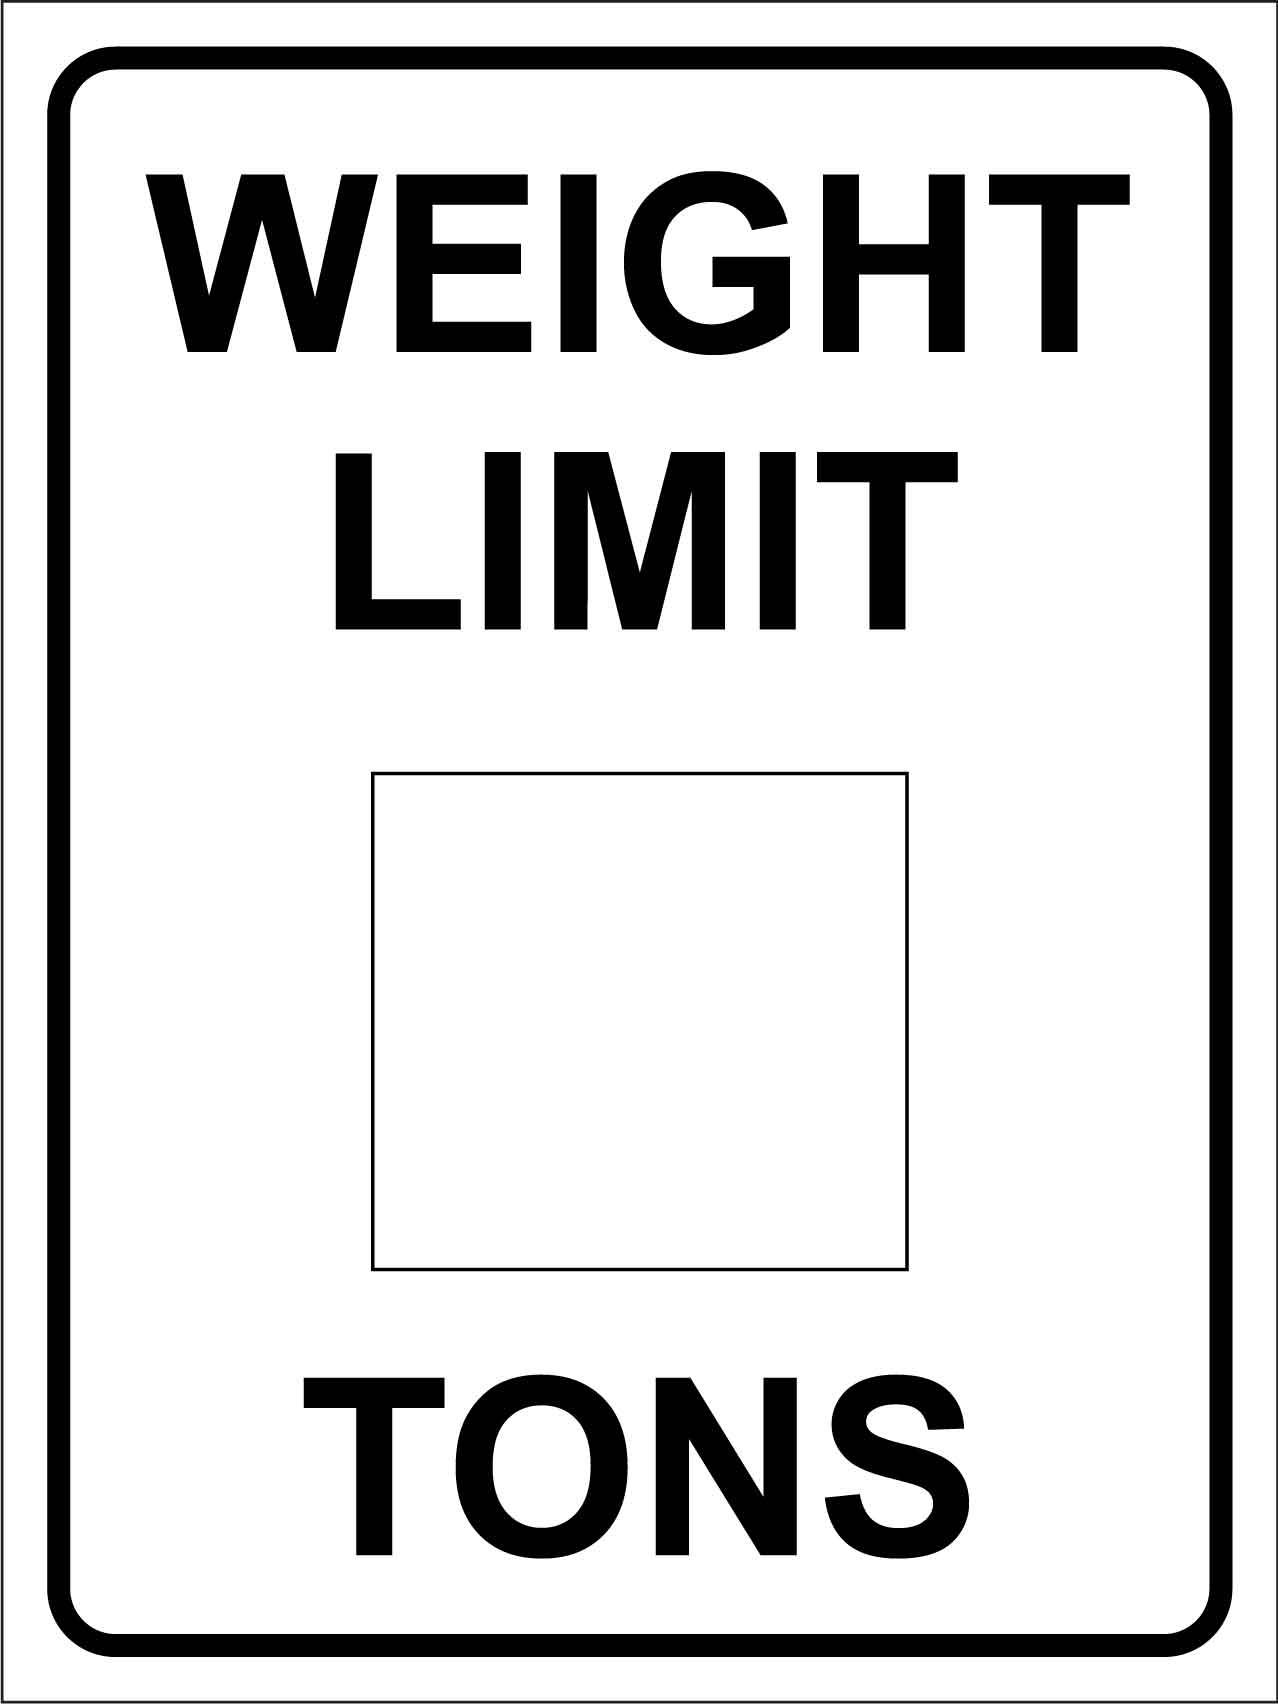 Weight Limit _ Tons Sign